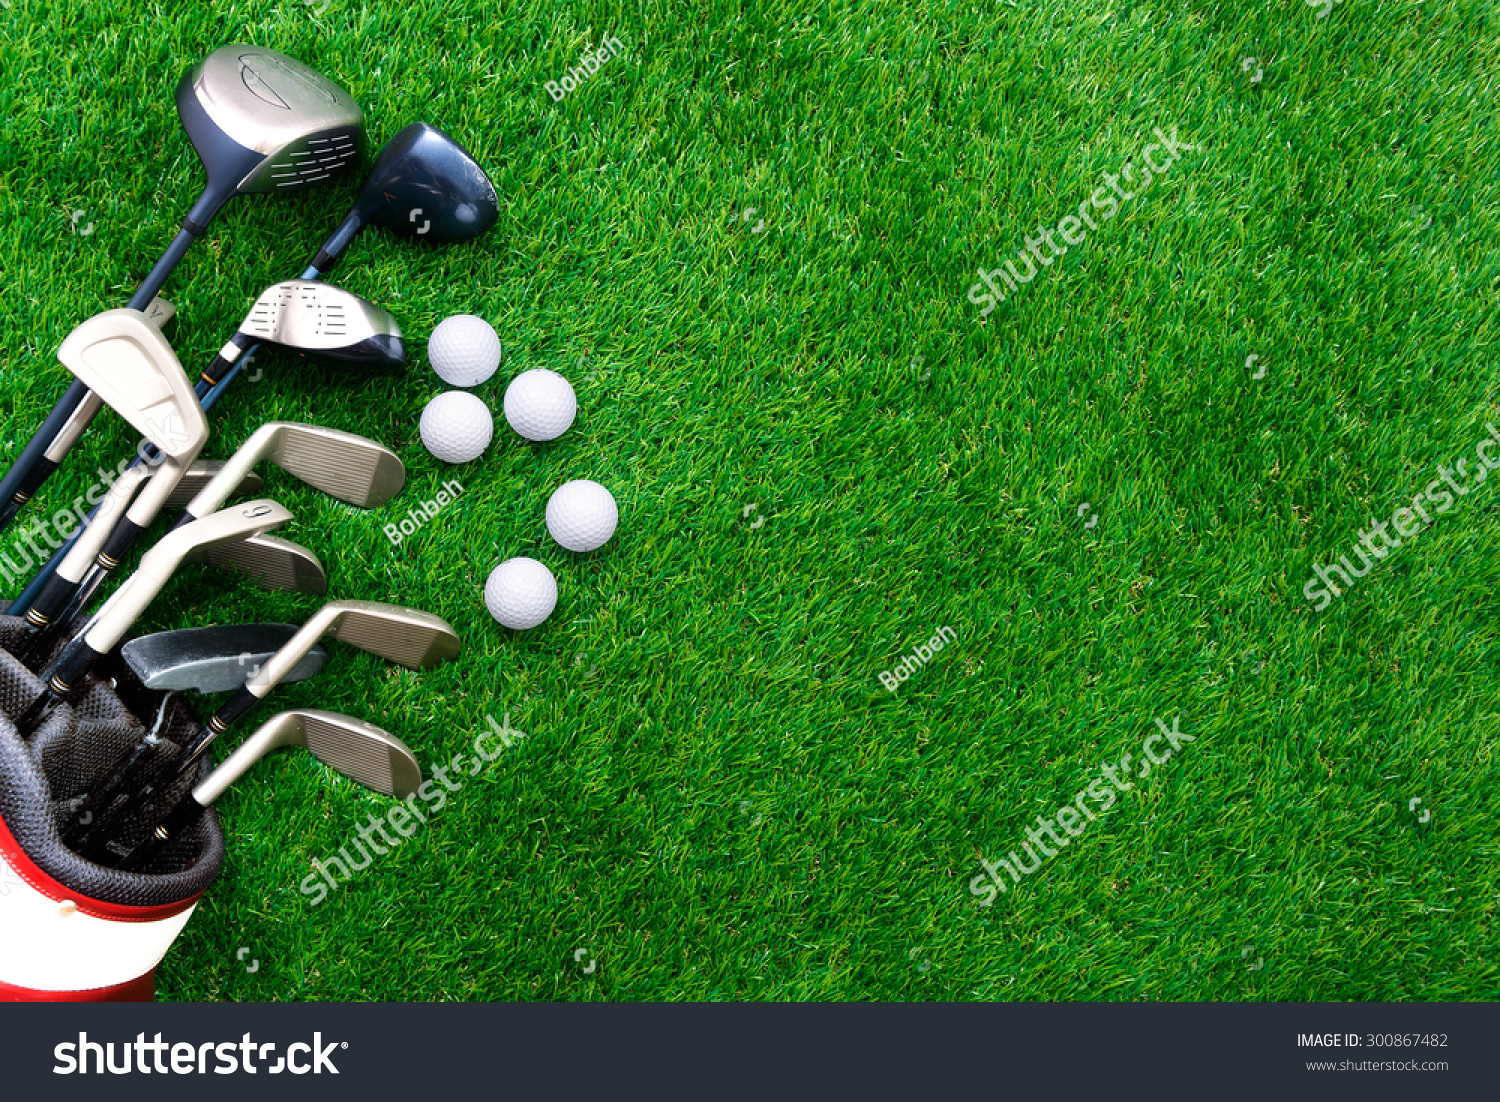 Golf ball and golf club in bag on green grass #300867482